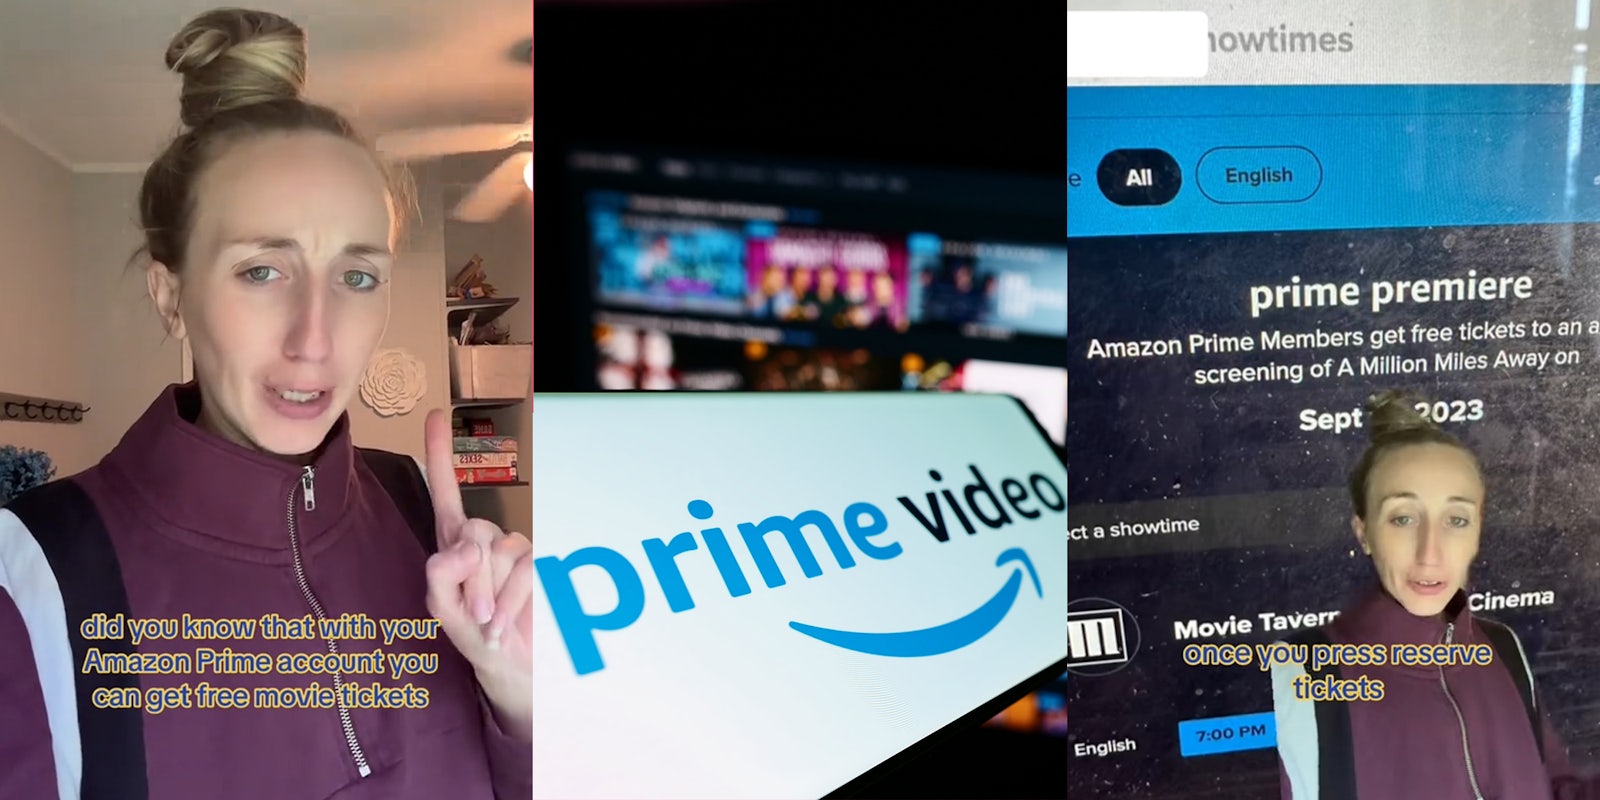 Prime user speaking with caption 'did you know that with your Amazon Prime account you can get free movie tickets' (l) Amazon Prime Video on phone screen and on laptop screen (c) Prime user greenscreen TikTok over image of Prime with caption 'once you press preserve tickets' (r)